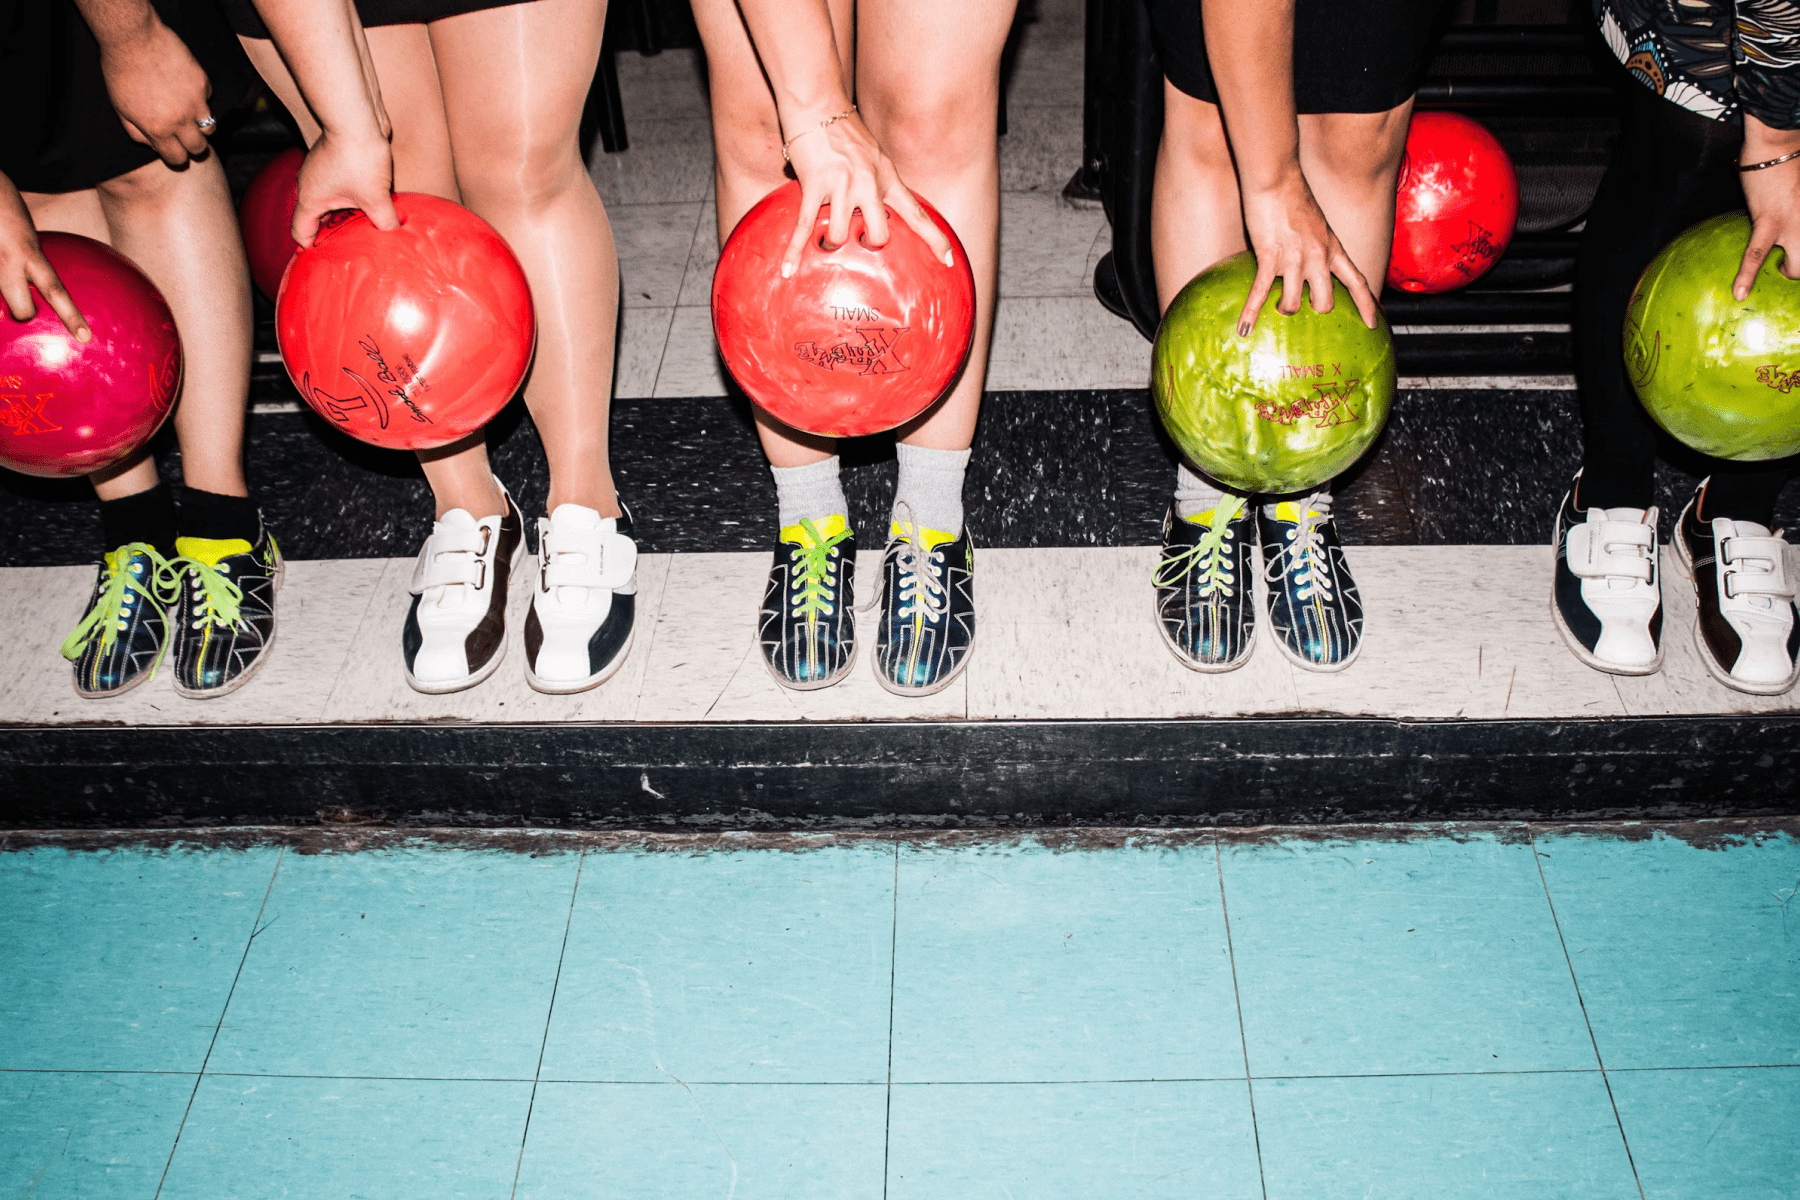 The legs of people wearing bowling shoes and holding colorful bowling balls.